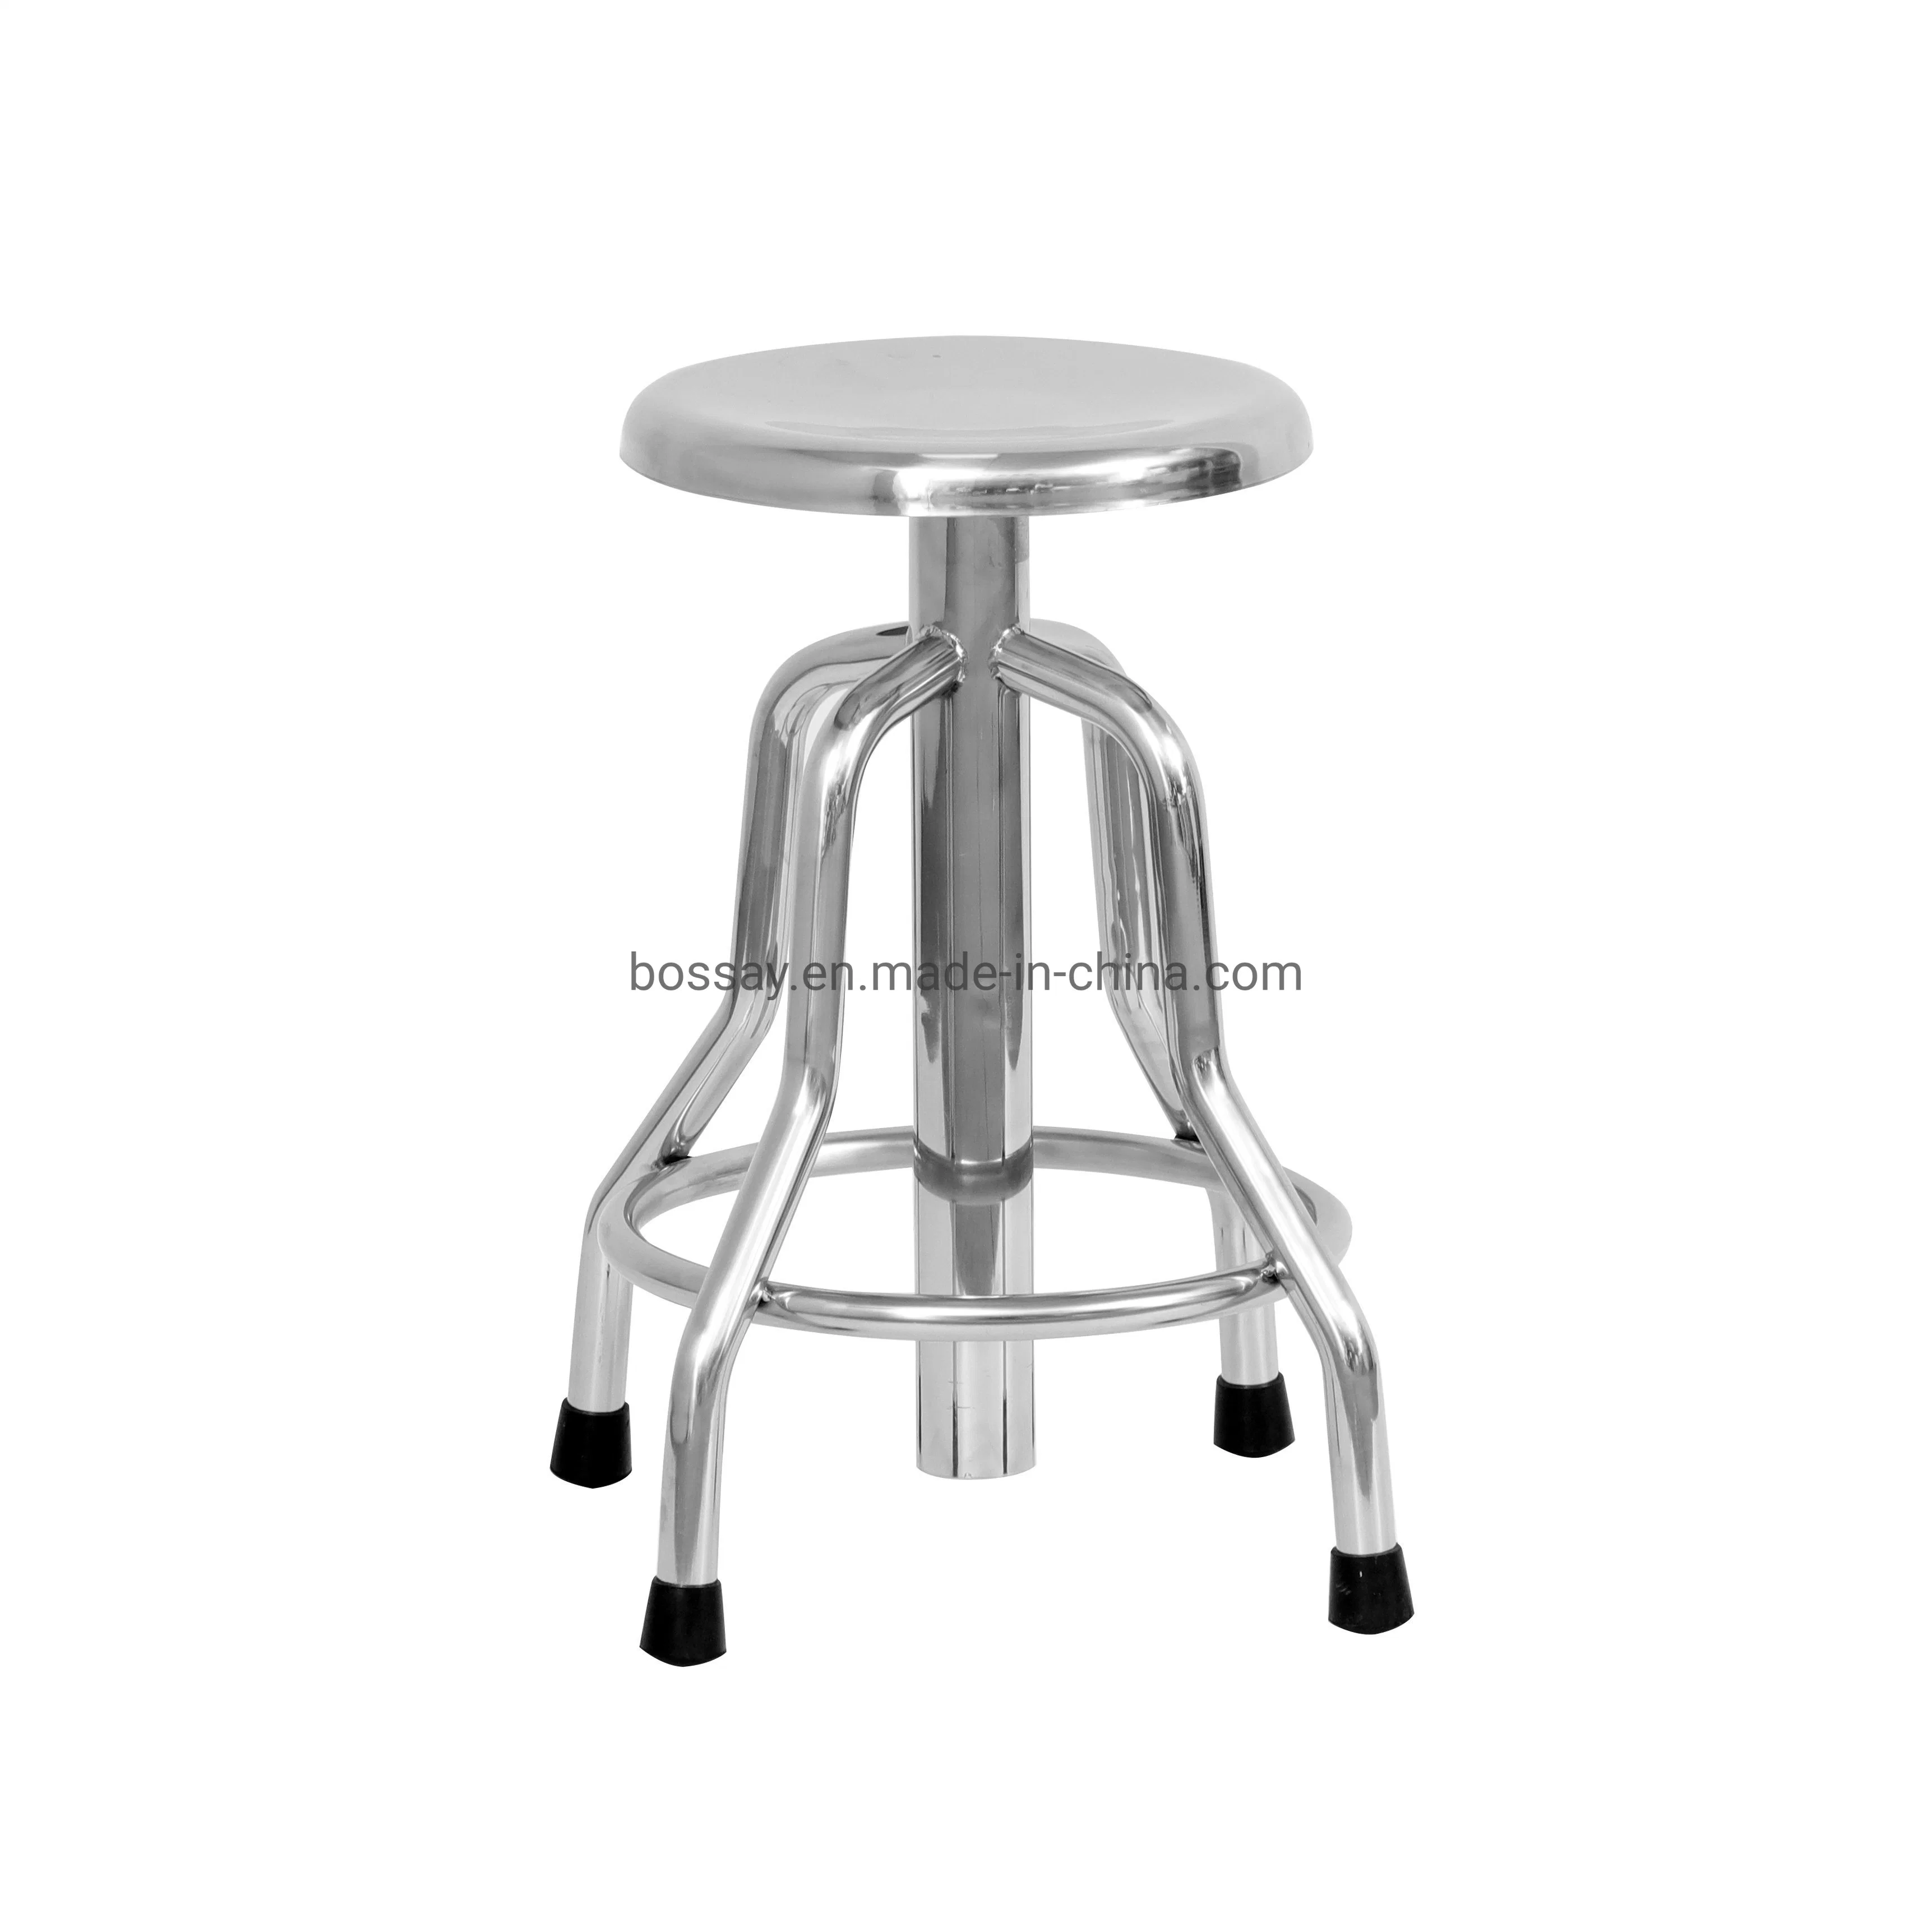 Hospital Clinic Dental Doctor Chair Operation Stool Medical Furniture